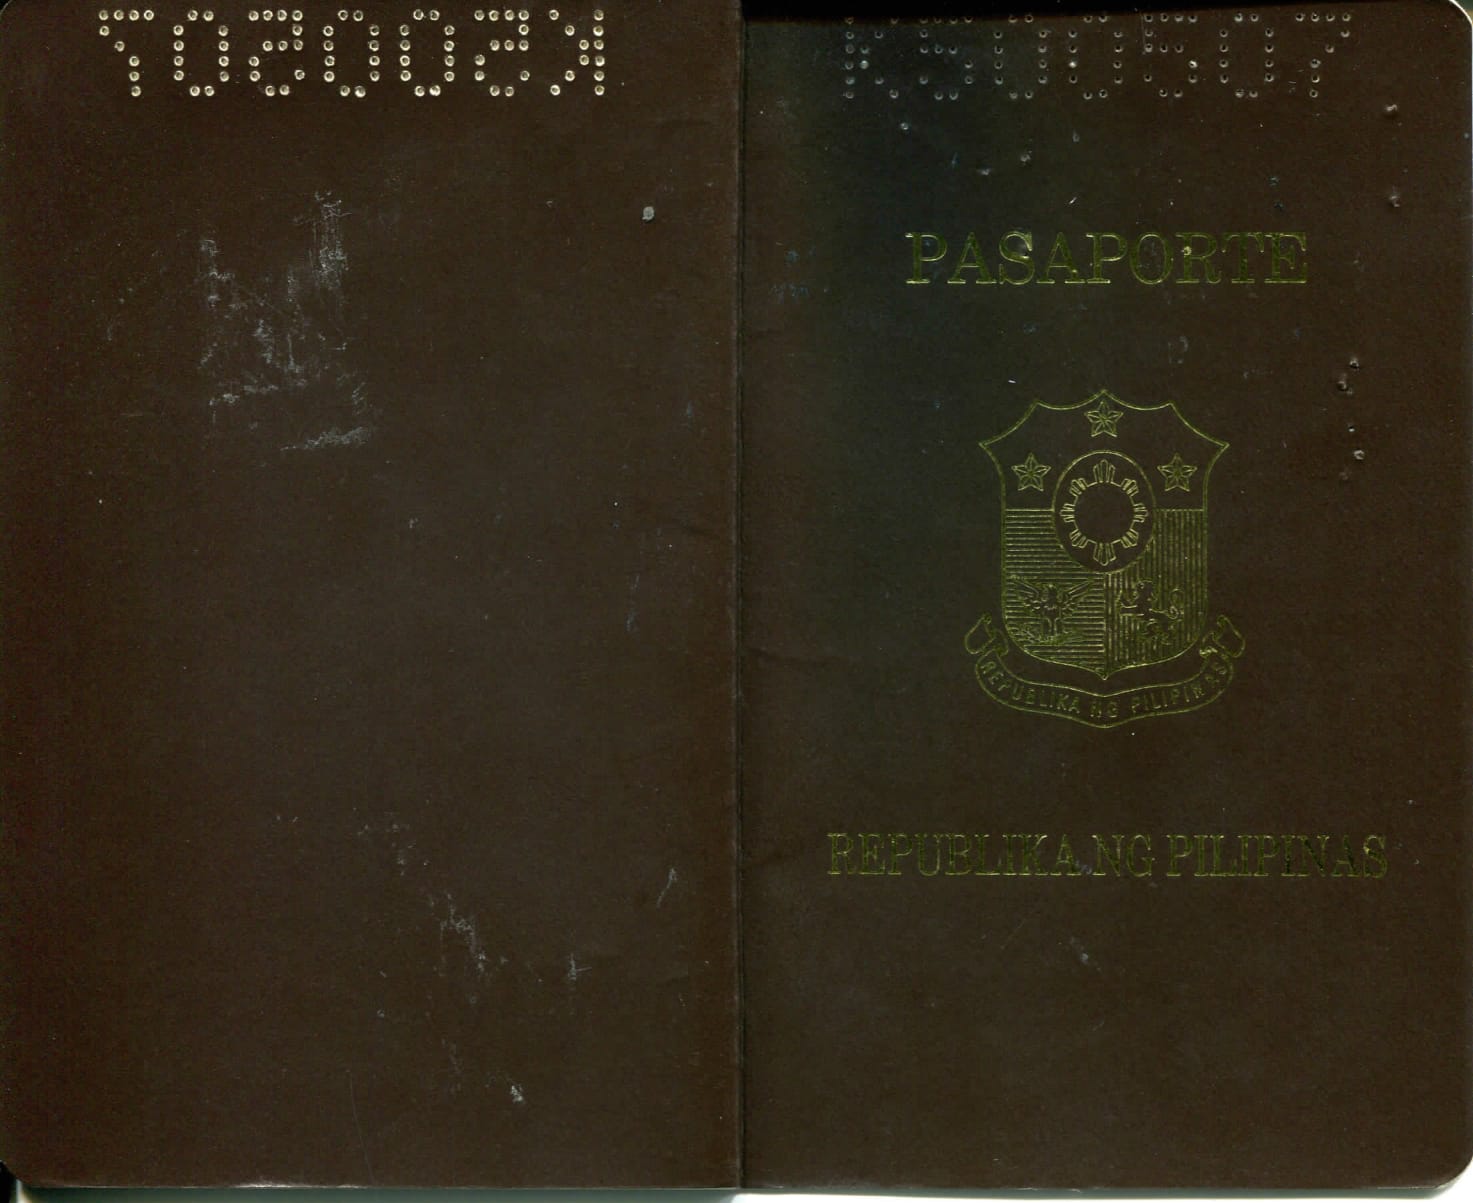 Scan - Etta McKenna's passport cover.1976 Passport from the Philippine Immigration Office, during process to immigrate to the US.Names of passport pages in Wika Filipino “Pasaporte” and “Republica”Notes from Sarah Carlson, in discussion with McKenna: “First Phil. passport I used when I immigrated to the US in 1977. It reminded me of the months of overtime work in order to afford, prepare and complete all documents needed to come to the US. Without any relatives tosupport me in the US, I had to make sure I had enough to support myself the first few months in the new land until I got a job. The process, even though difficult, is worth remembering.” Any views, findings, conclusions, or recommendations expressed in this story do not necessarily represent those of the National Endowment for the Humanities. (c) Field Museum of Natural History - CC BY-NC 4.0